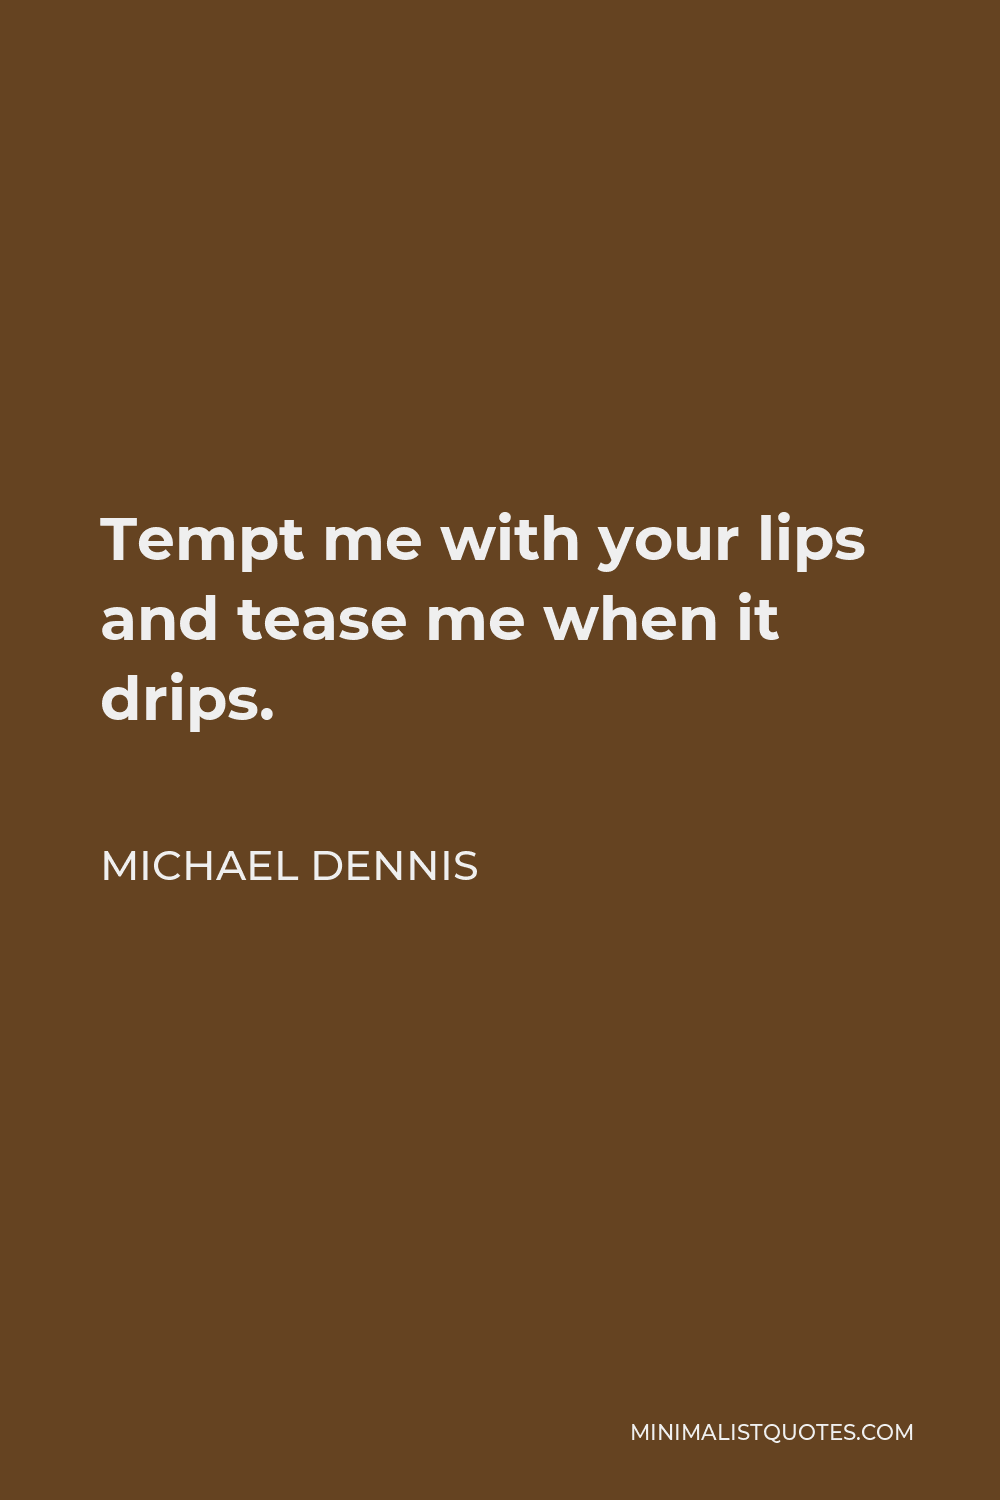 Michael Dennis Quote - Tempt me with your lips and tease me when it drips.